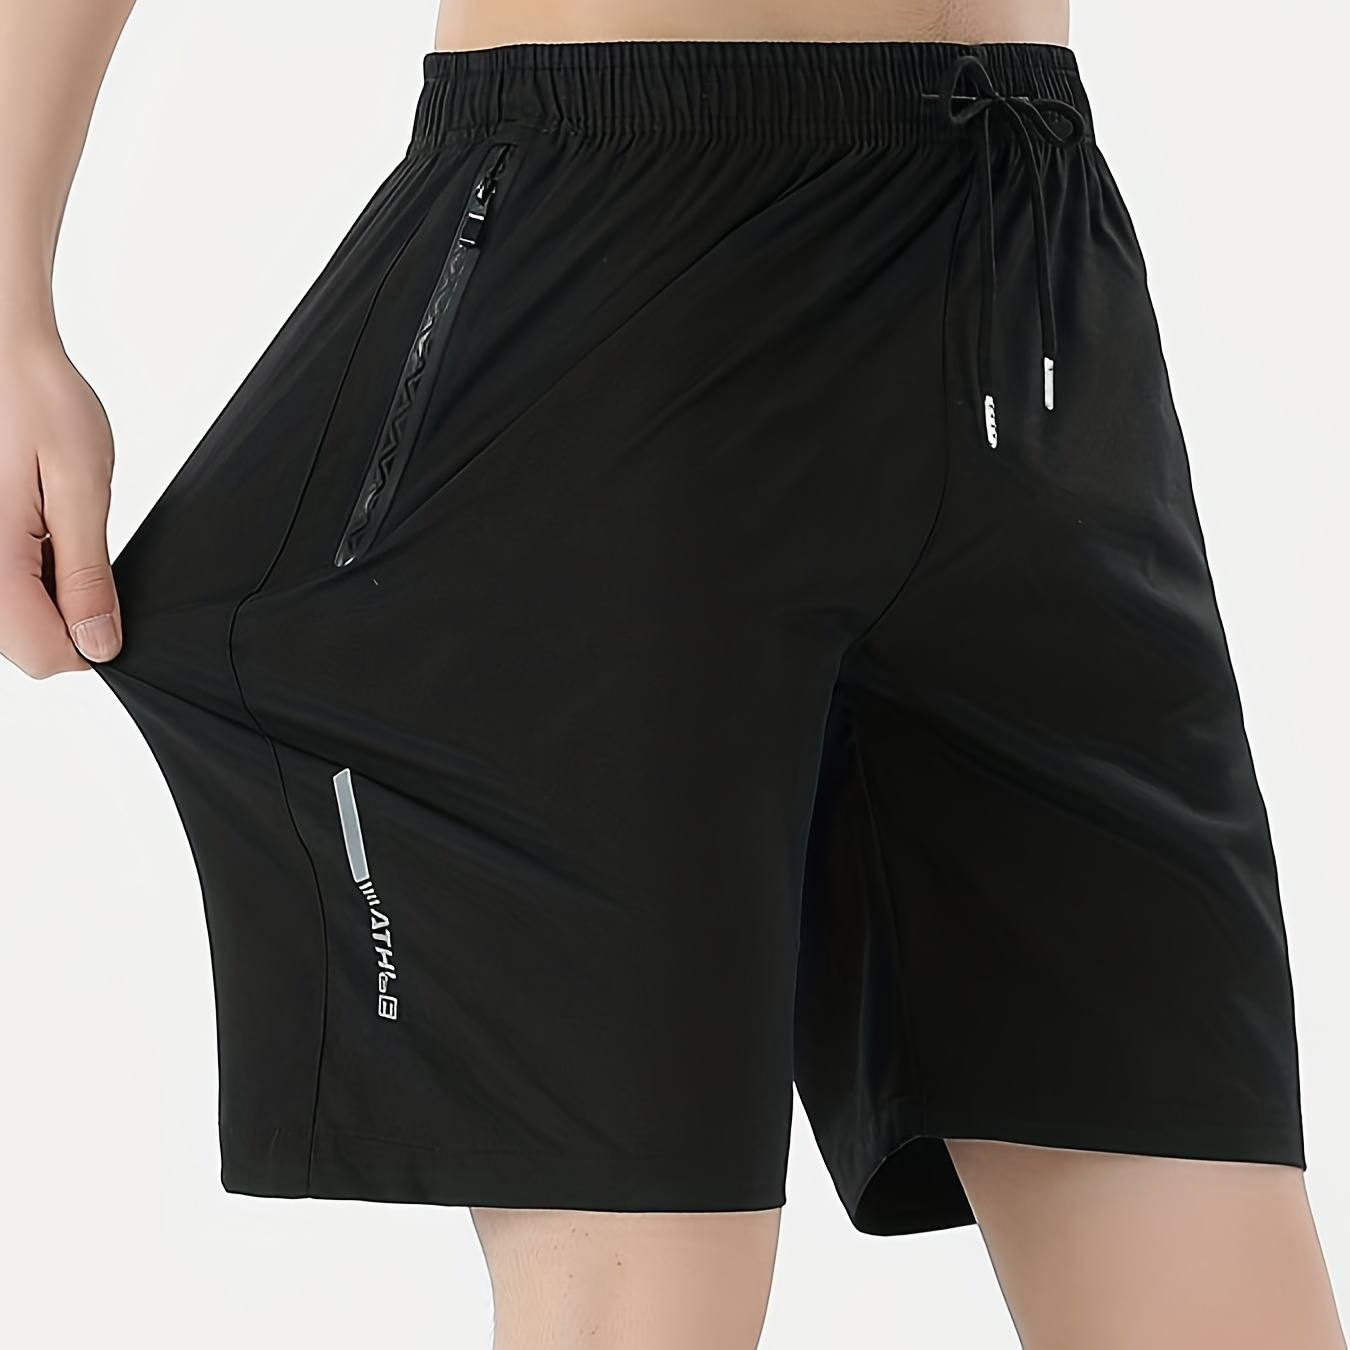 Quick Dry Moisture Wicking Sport Drawstring Shorts With Zipper Pockets For Men, Summer Cycling, Fitness, Gym And Outdoor Activities